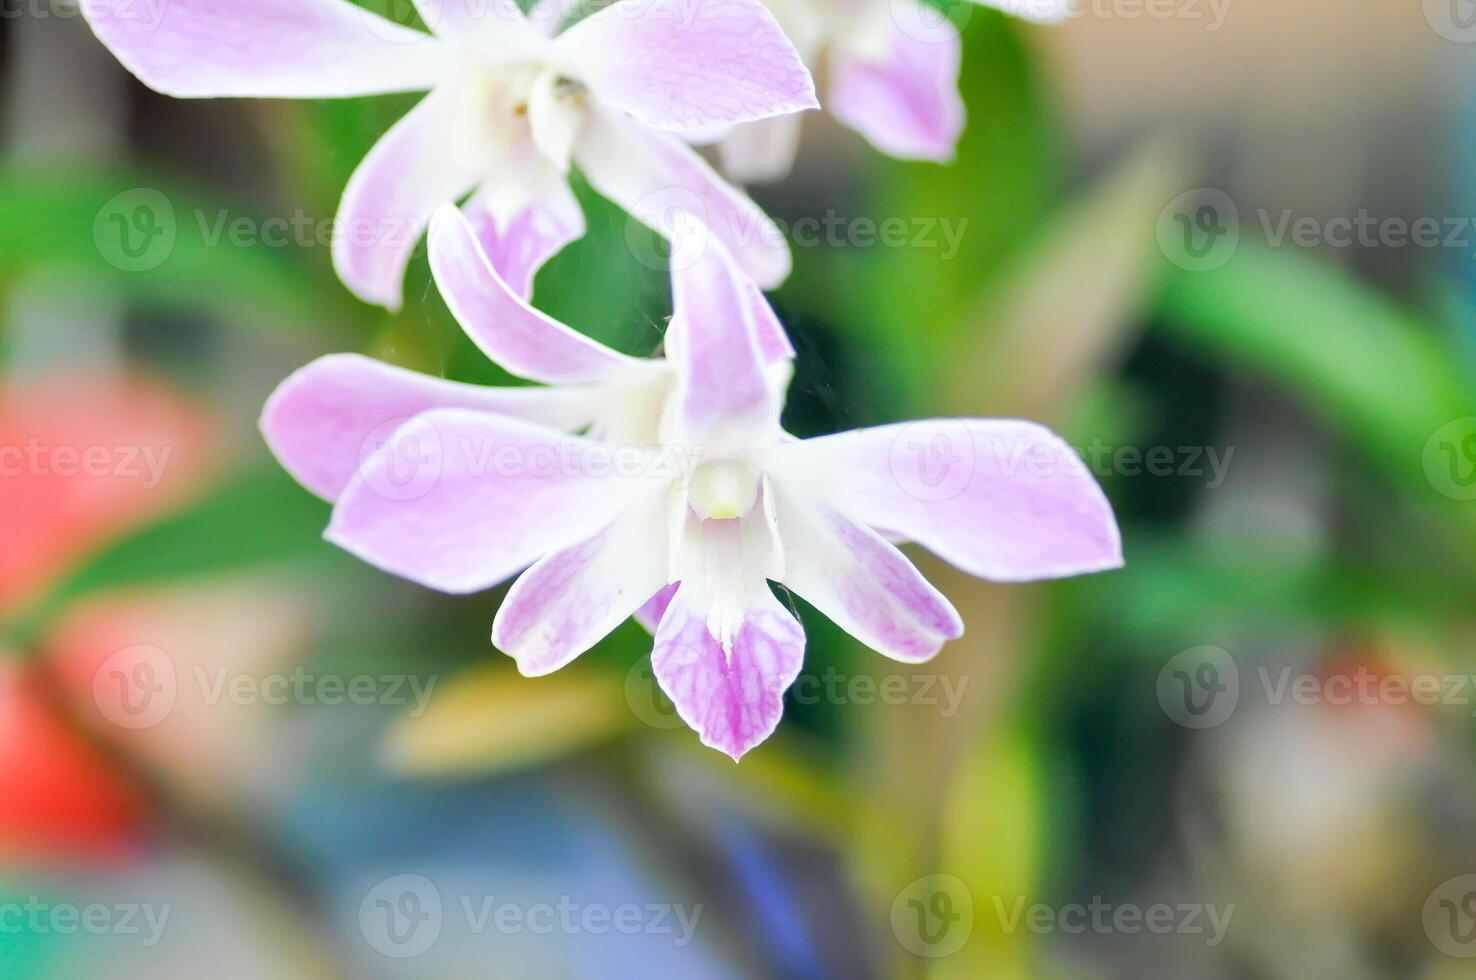 white and purple orchid flower or purple orchid or white and purple orchid flower, orchid or ORCHIDACEAE photo